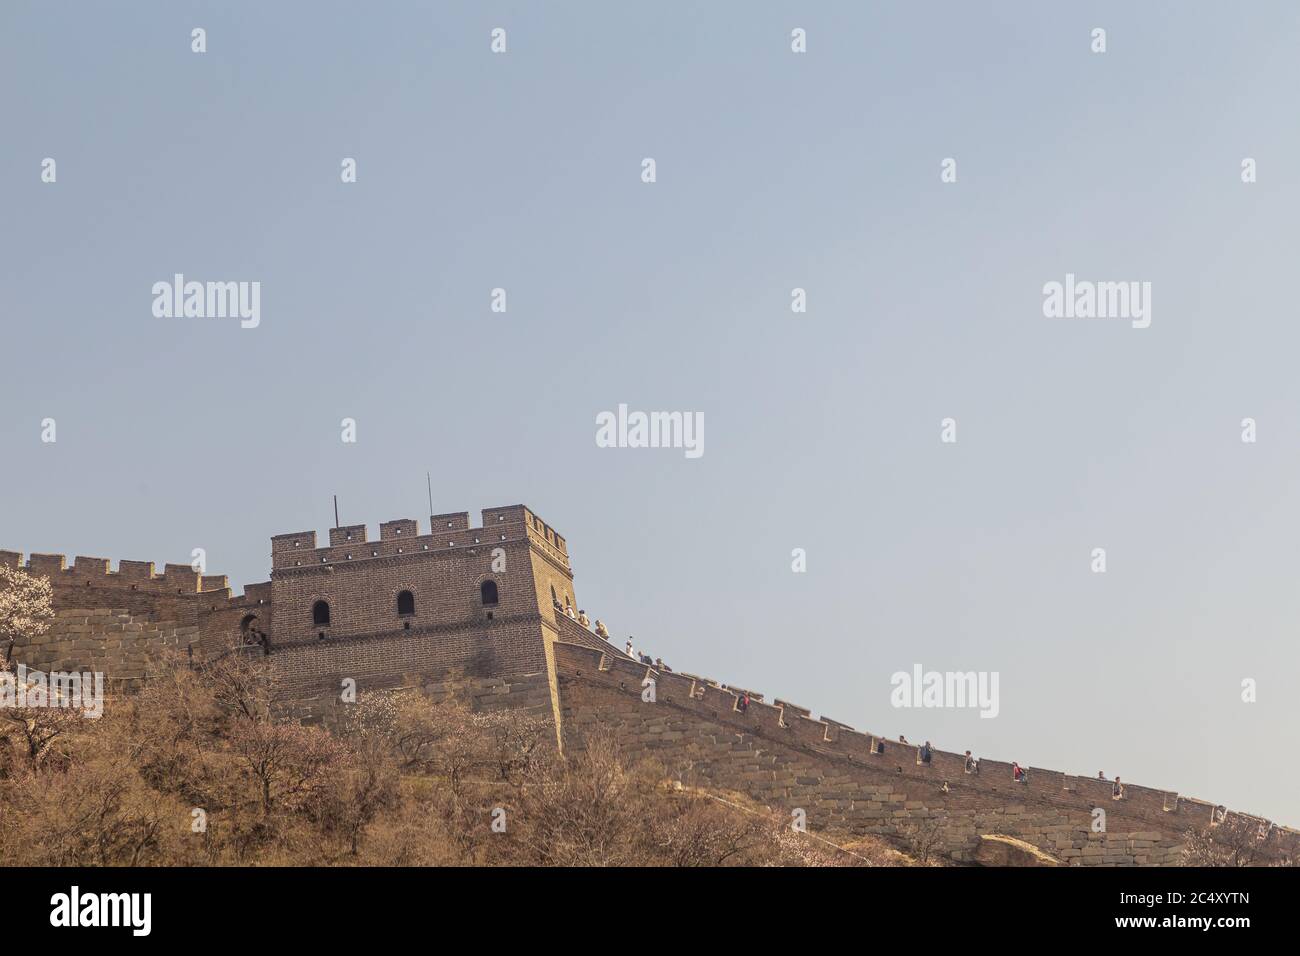 Beijing, China - CIRCA 2020: Great Wall of China in a green forest landscape at Mutianyu in Huairou District near Beijing, China. Autumn view of Grate Stock Photo